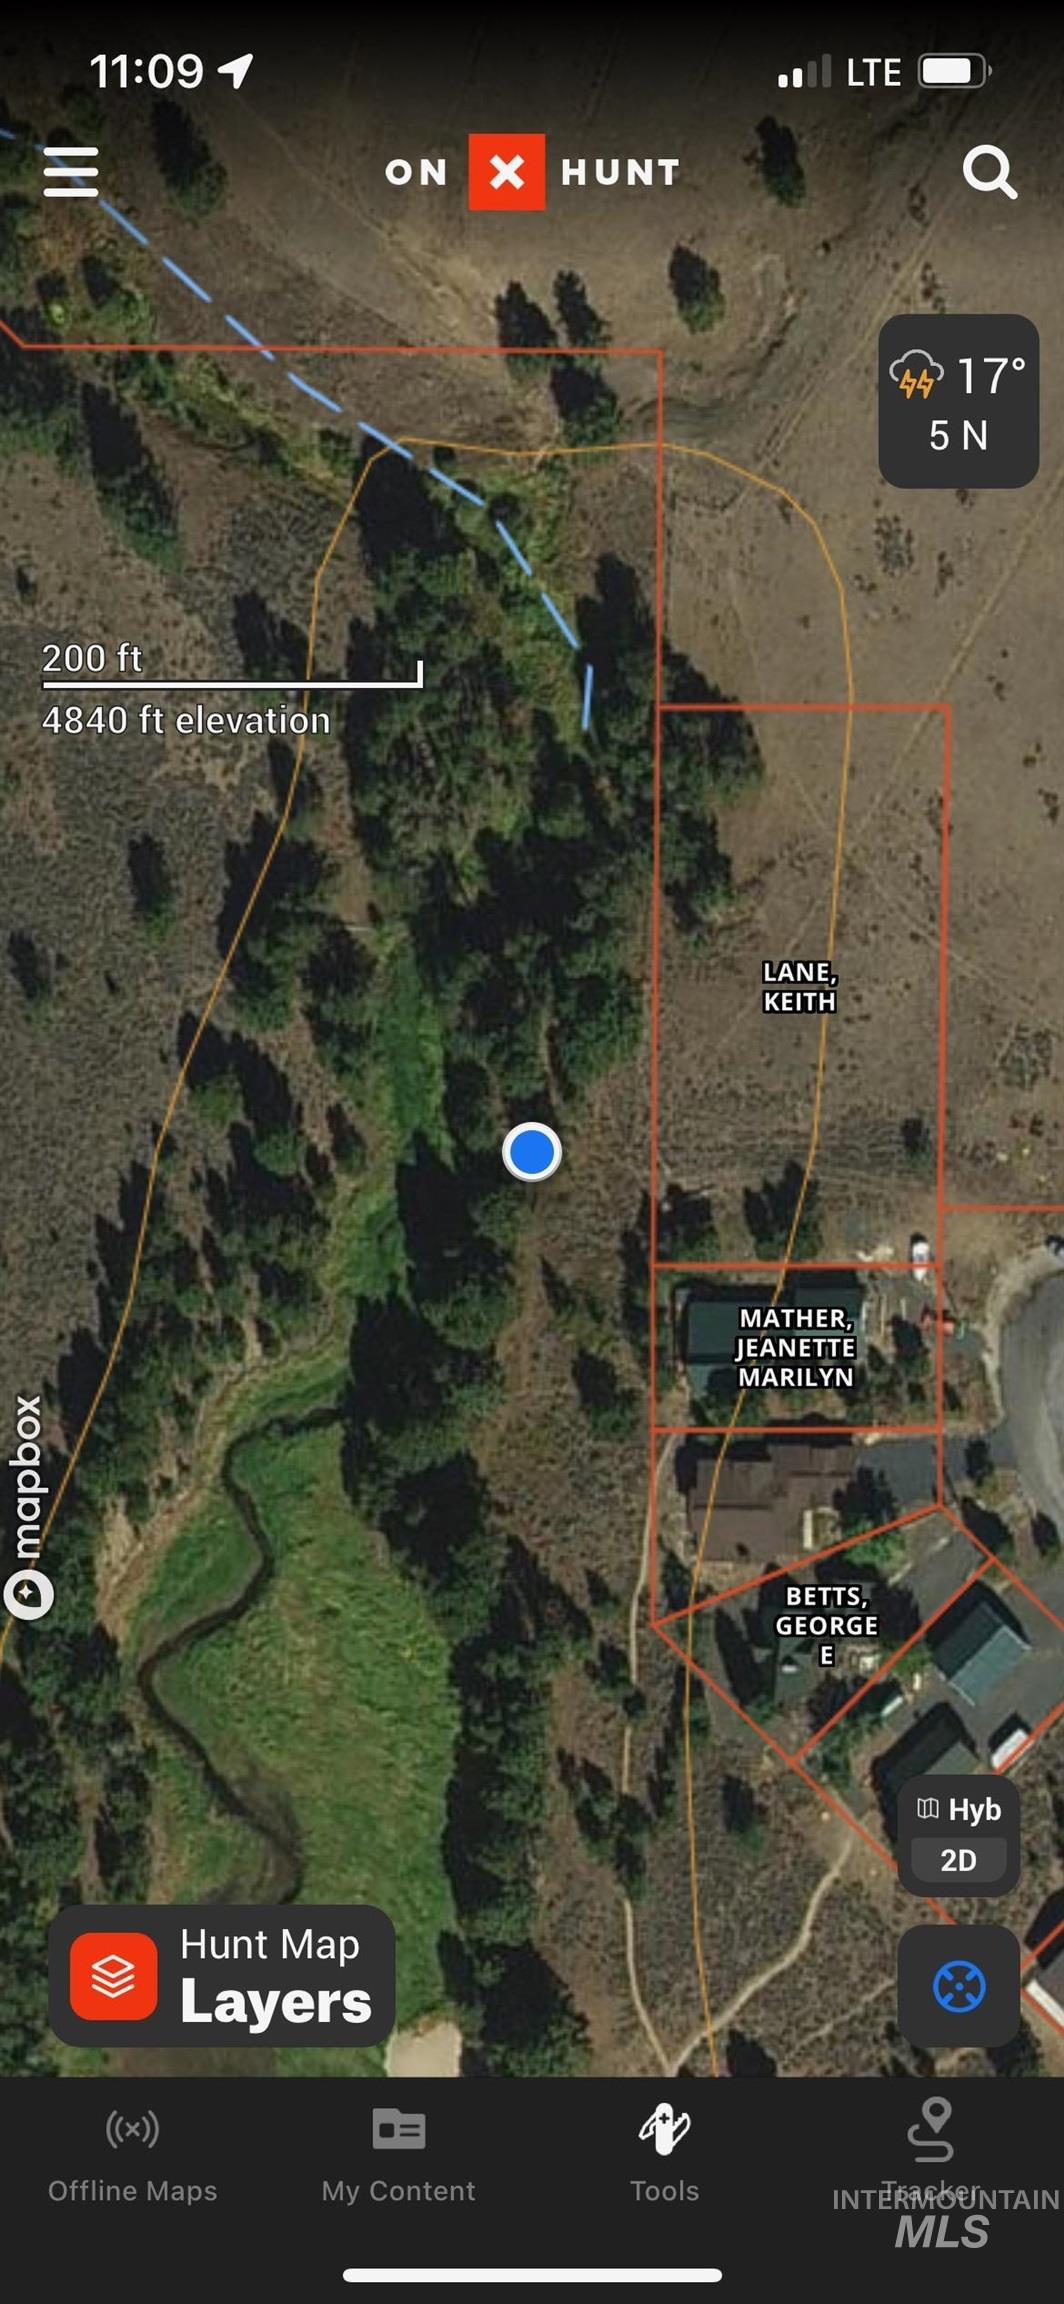 TBD Margot Drive, Donnelly, Idaho 83615, Land For Sale, Price $899,000,MLS 98881069